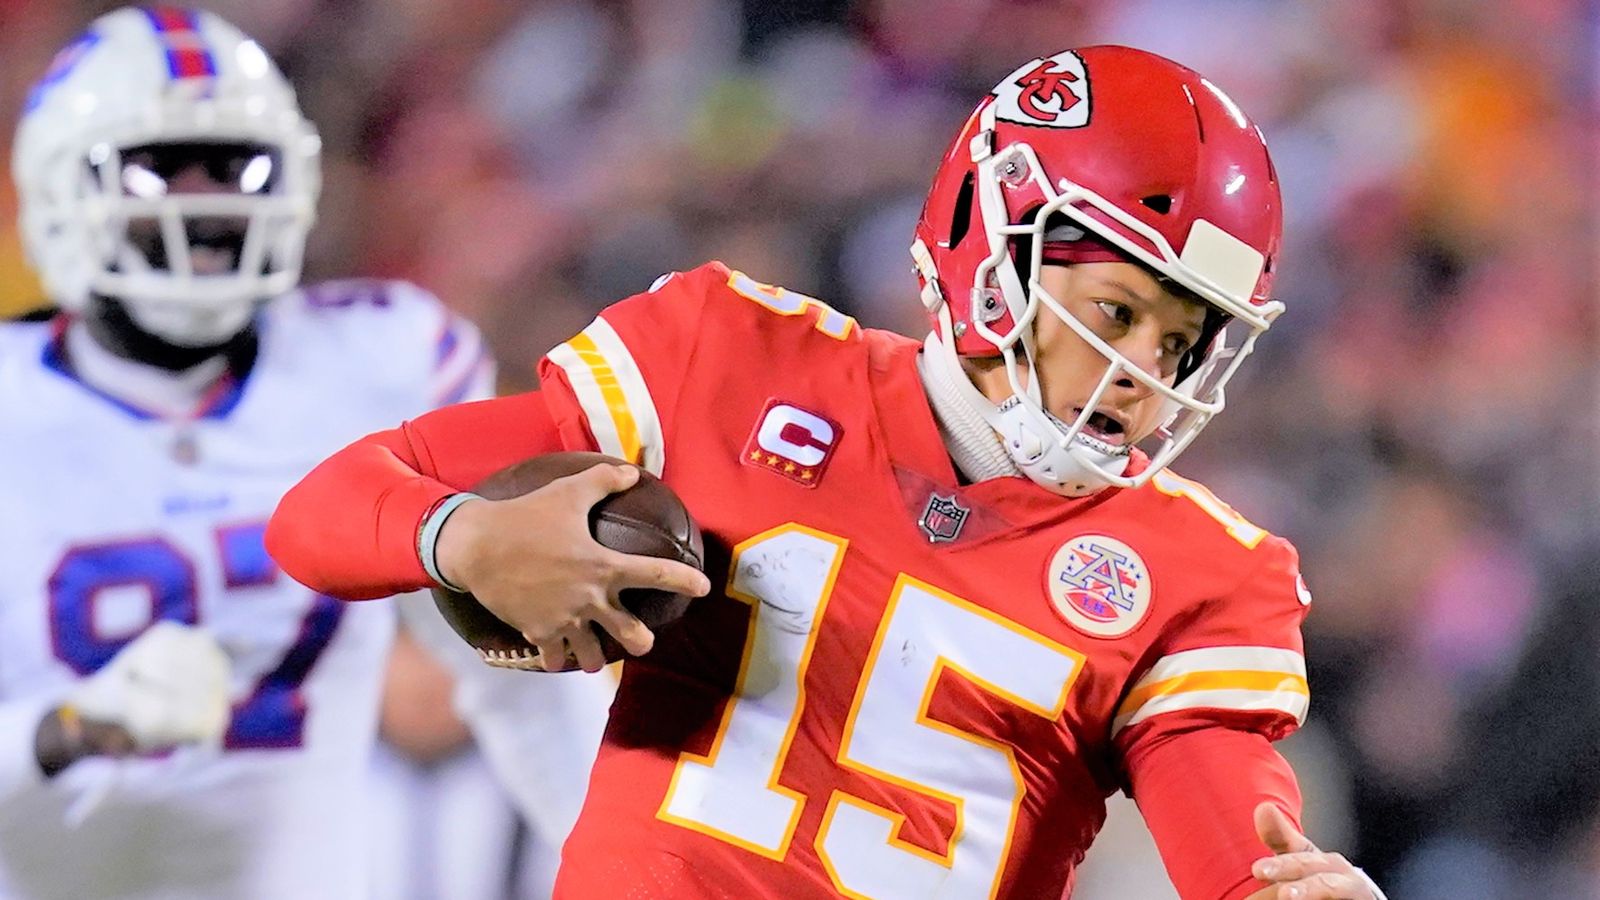 Buffalo Bills 36-42 Kansas City Chiefs: Patrick Mahomes throws walk-off TD in overtime to clinch win after epic battle with Josh Allen